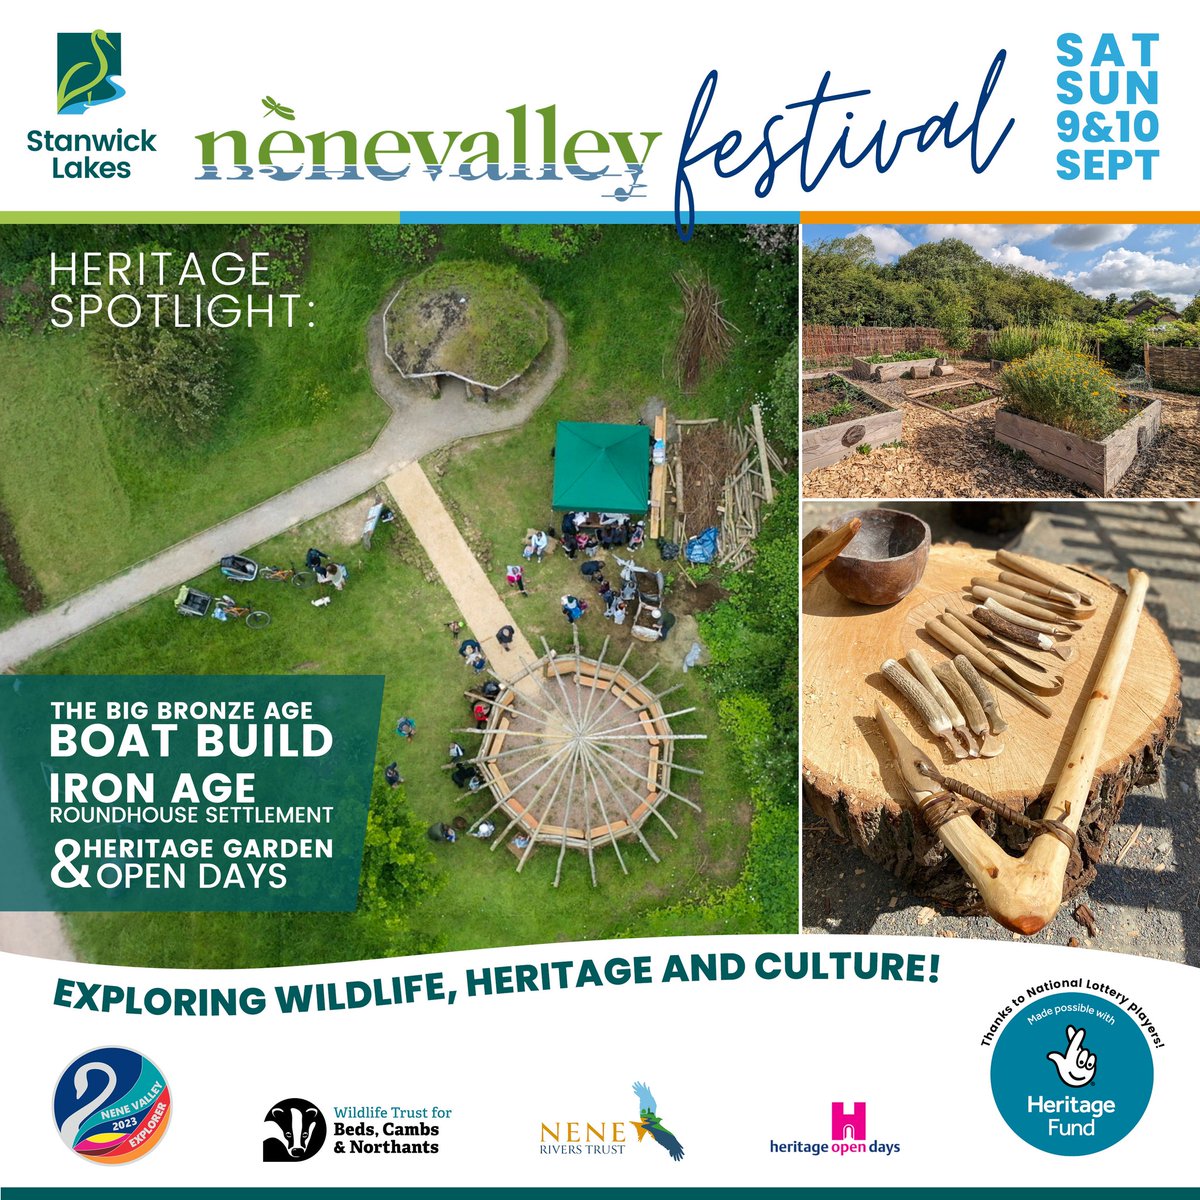 It's looking like a fantastic day out @StanwickLakes this weekend for @NeneFestival 

#Nenealleyfestival #heritage #wildlife #culture 

nenevalley.net 

@NeneRiversTrust 
@NNorthantsC 
@StanwickLakes